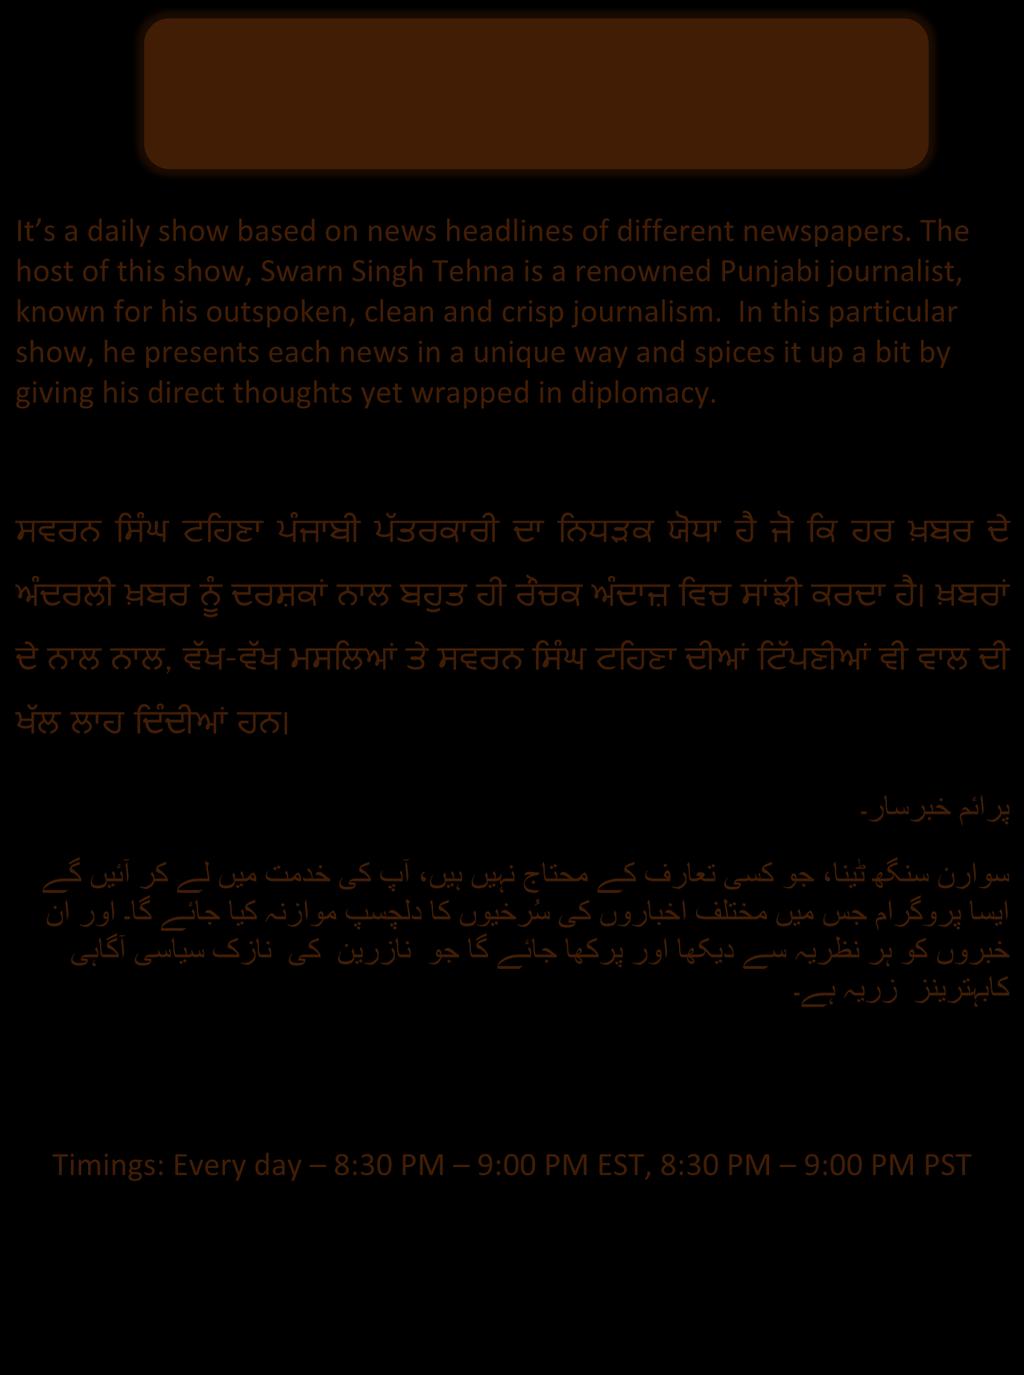 It s a daily show based on news headlines of different newspapers. The host of this show, Swarn Singh Tehna is a renowned Punjabi journalist, known for his outspoken, clean and crisp journalism.